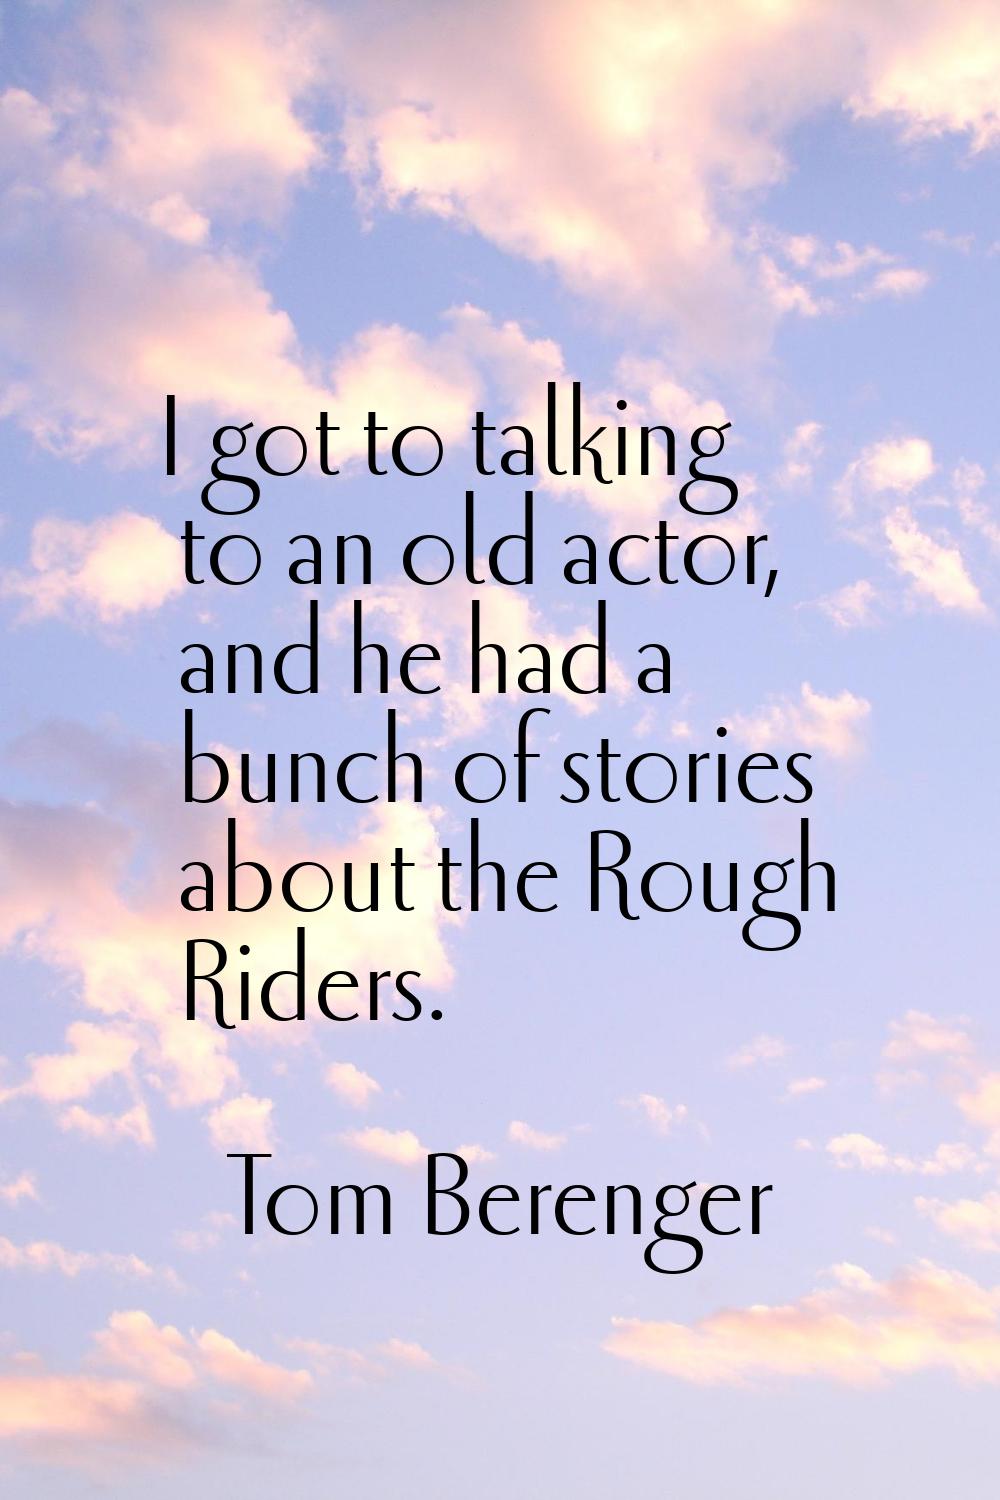 I got to talking to an old actor, and he had a bunch of stories about the Rough Riders.